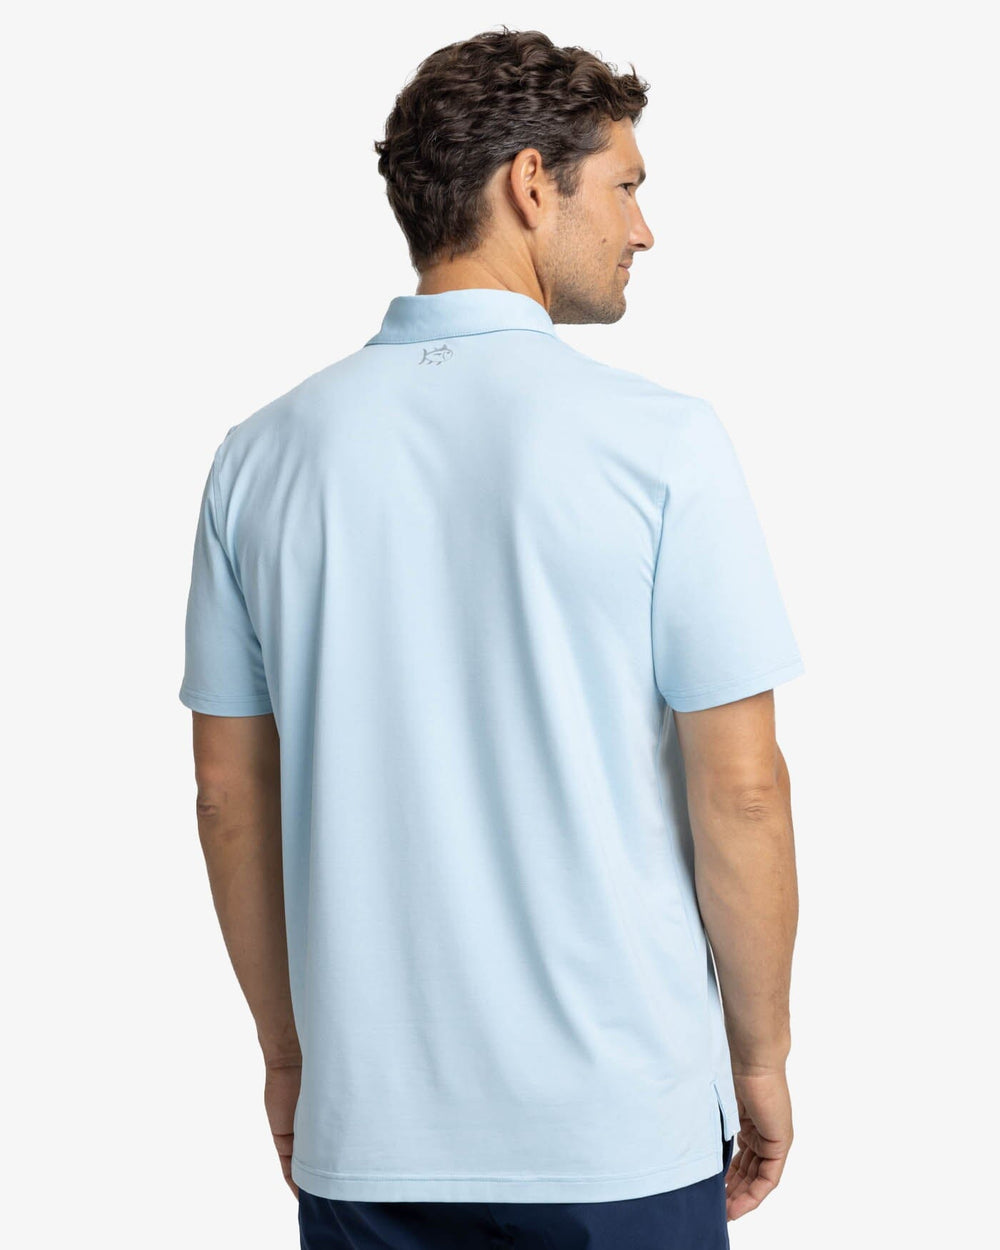 The back view of the Southern Tide brrr-eeze Heather Performance Polo Shirt by Southern Tide - Heather Dream Blue